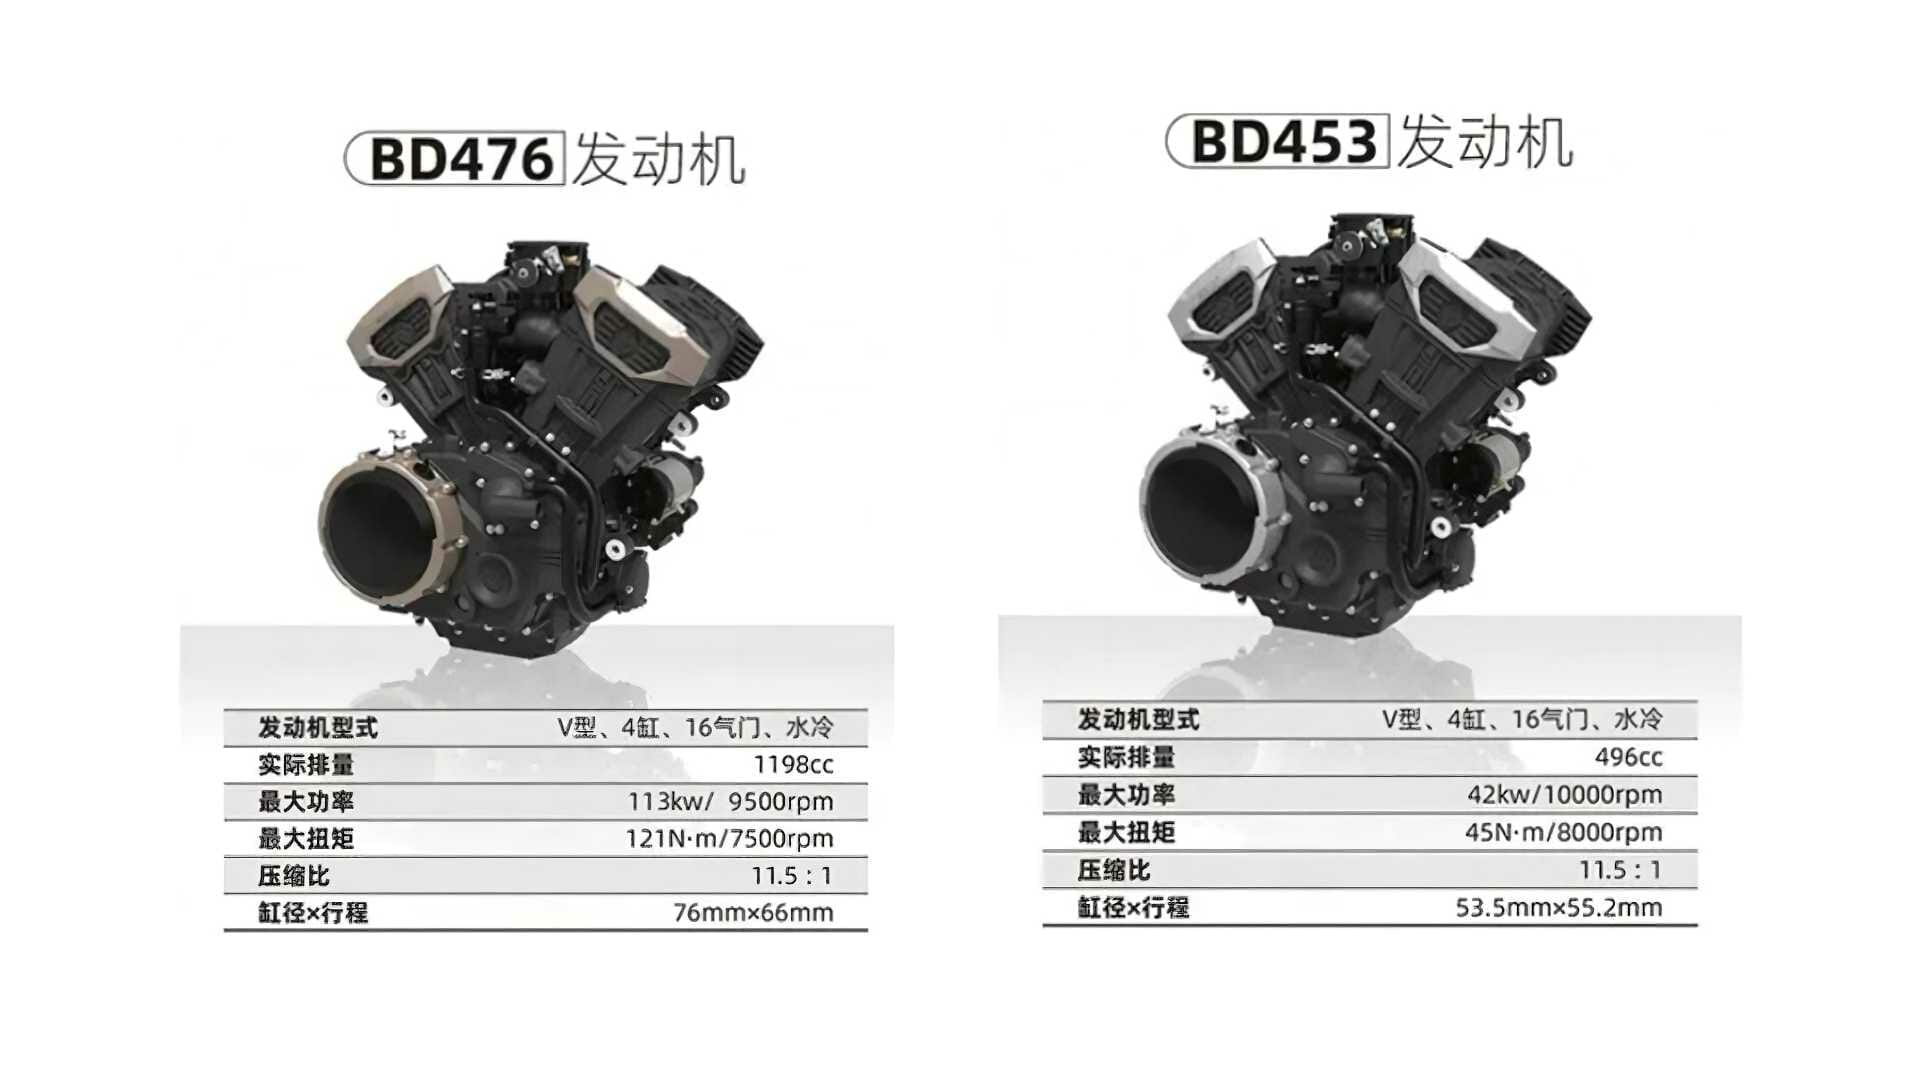 V4 engines from China
- also in the MOTORCYCLES.NEWS APP